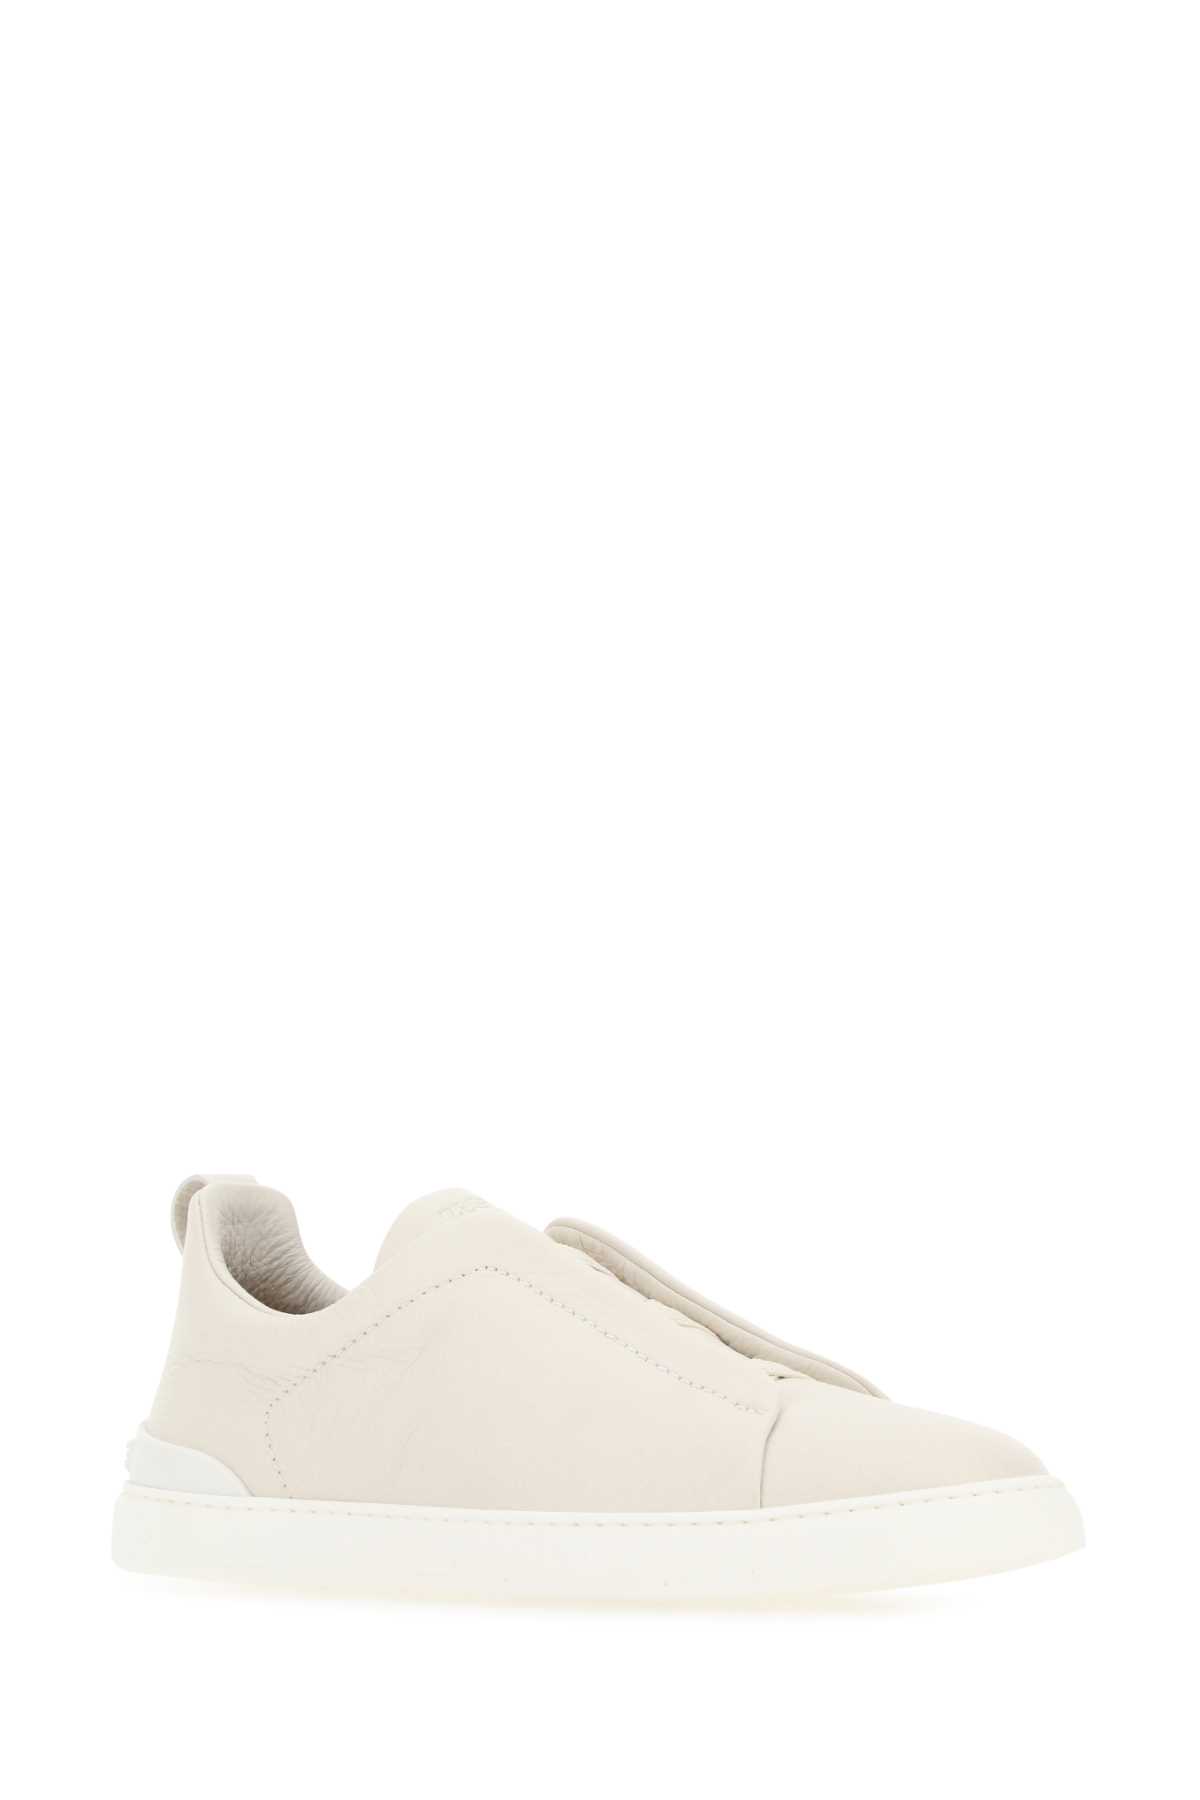 Zegna Ivory Leather Slip Ons In Pan